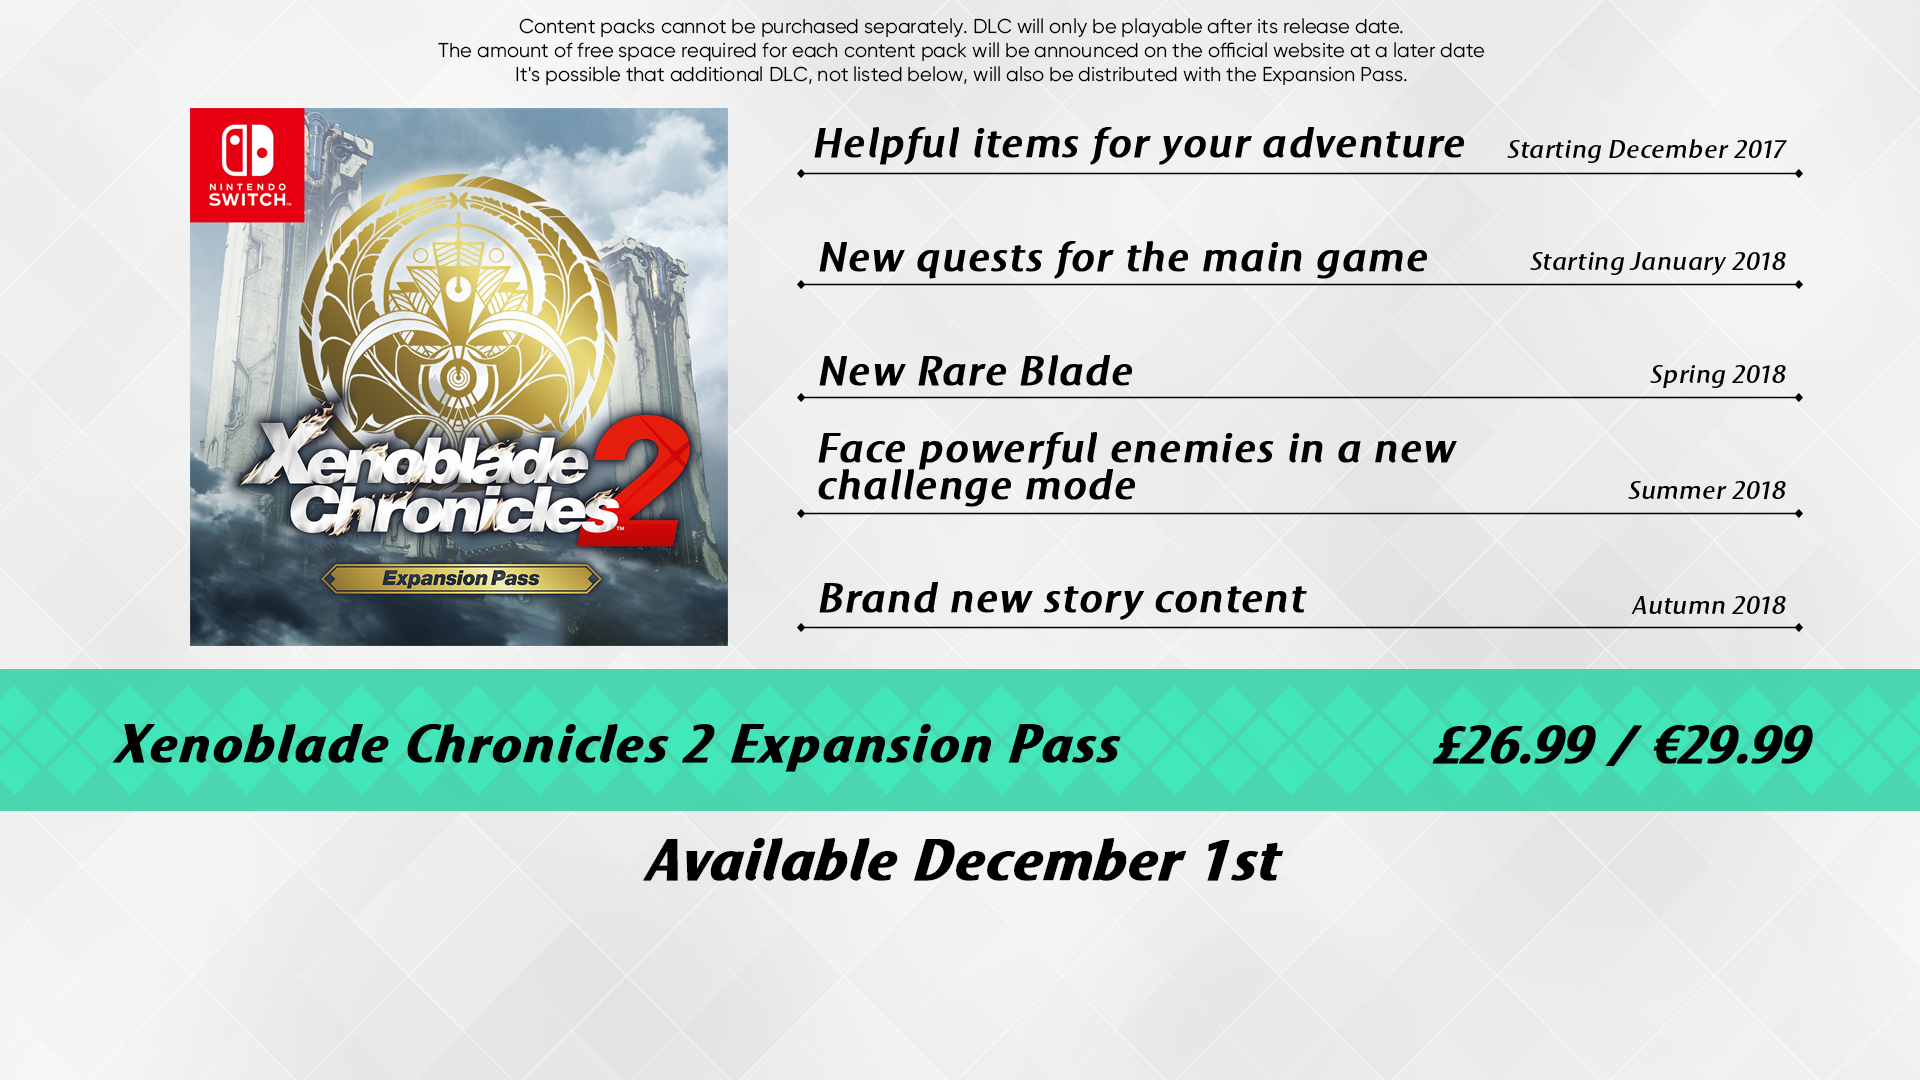 CI_NSwitch_XenobladeChronicles2_ExpansionPass_enGB.png